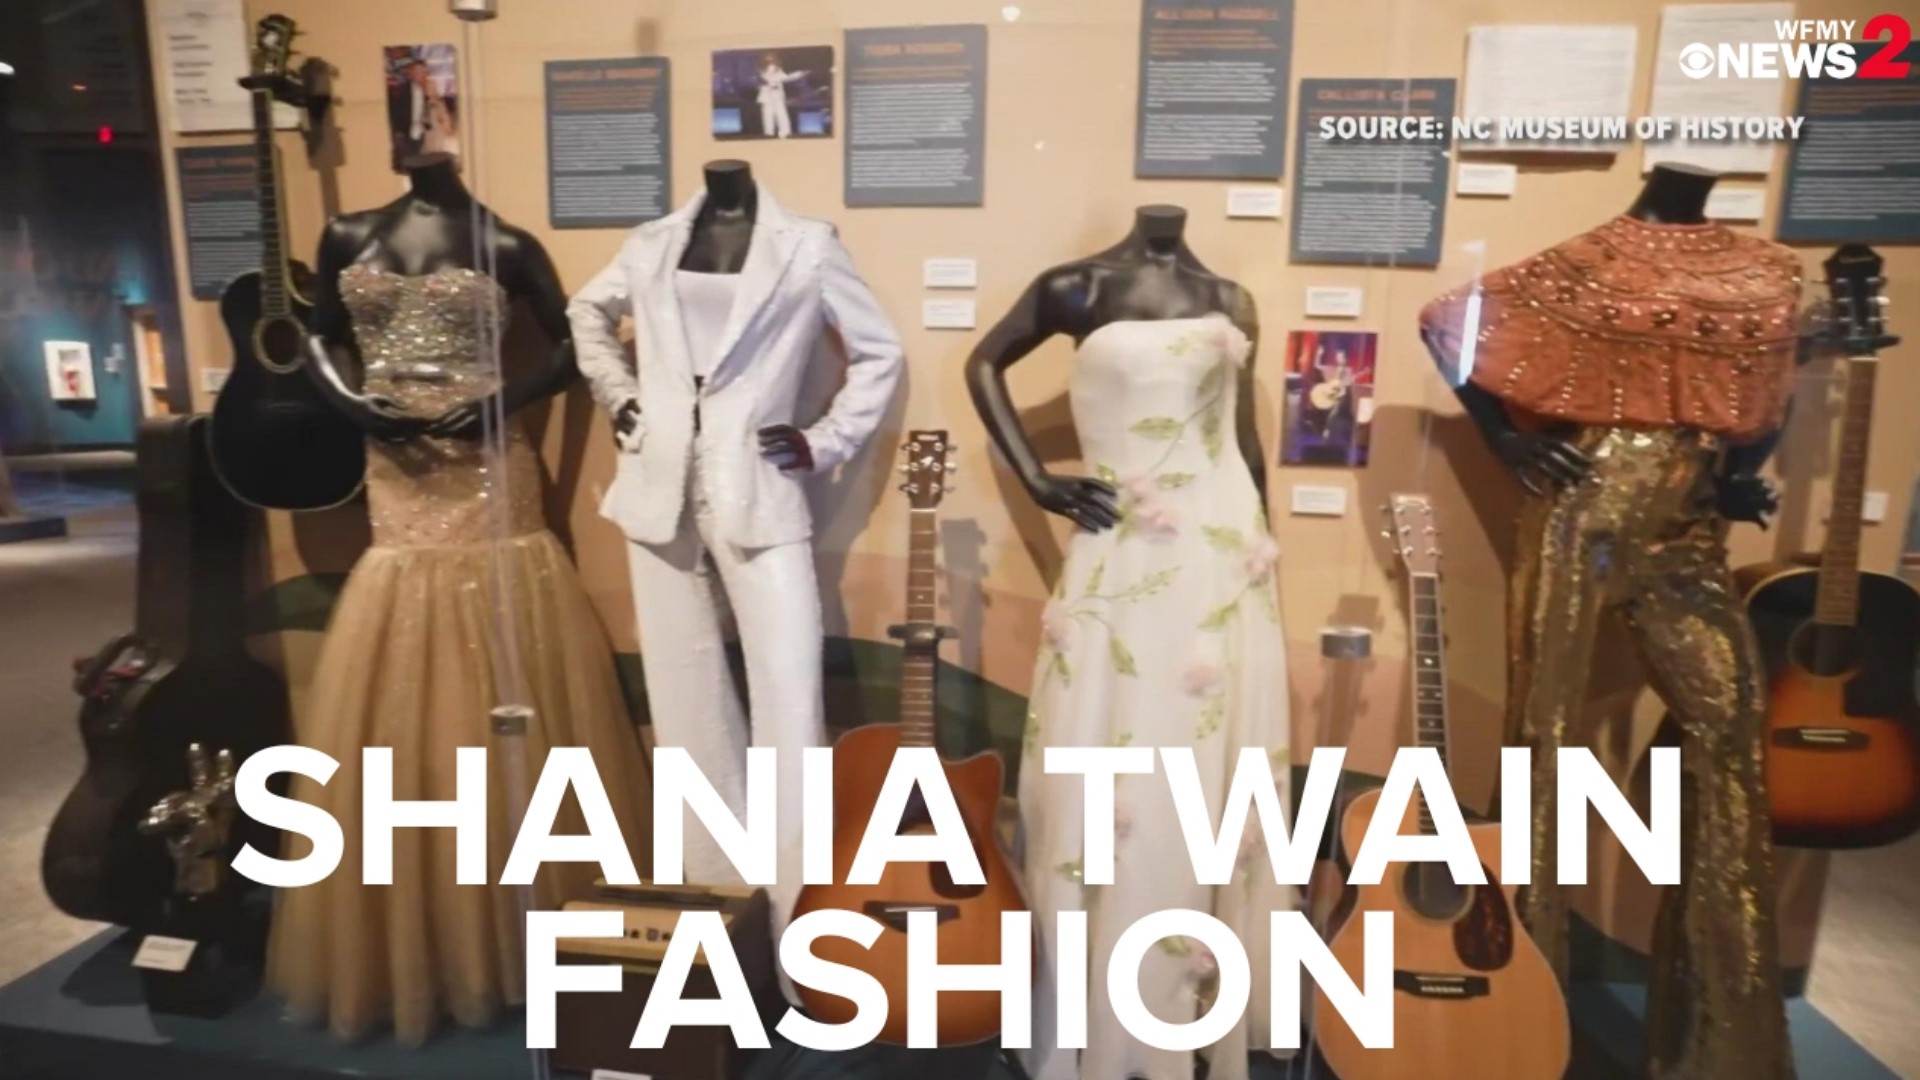 The fashion of country music stars Taylor Swift, Dolly Parton and more are on display at the North Carolina Museum of History.